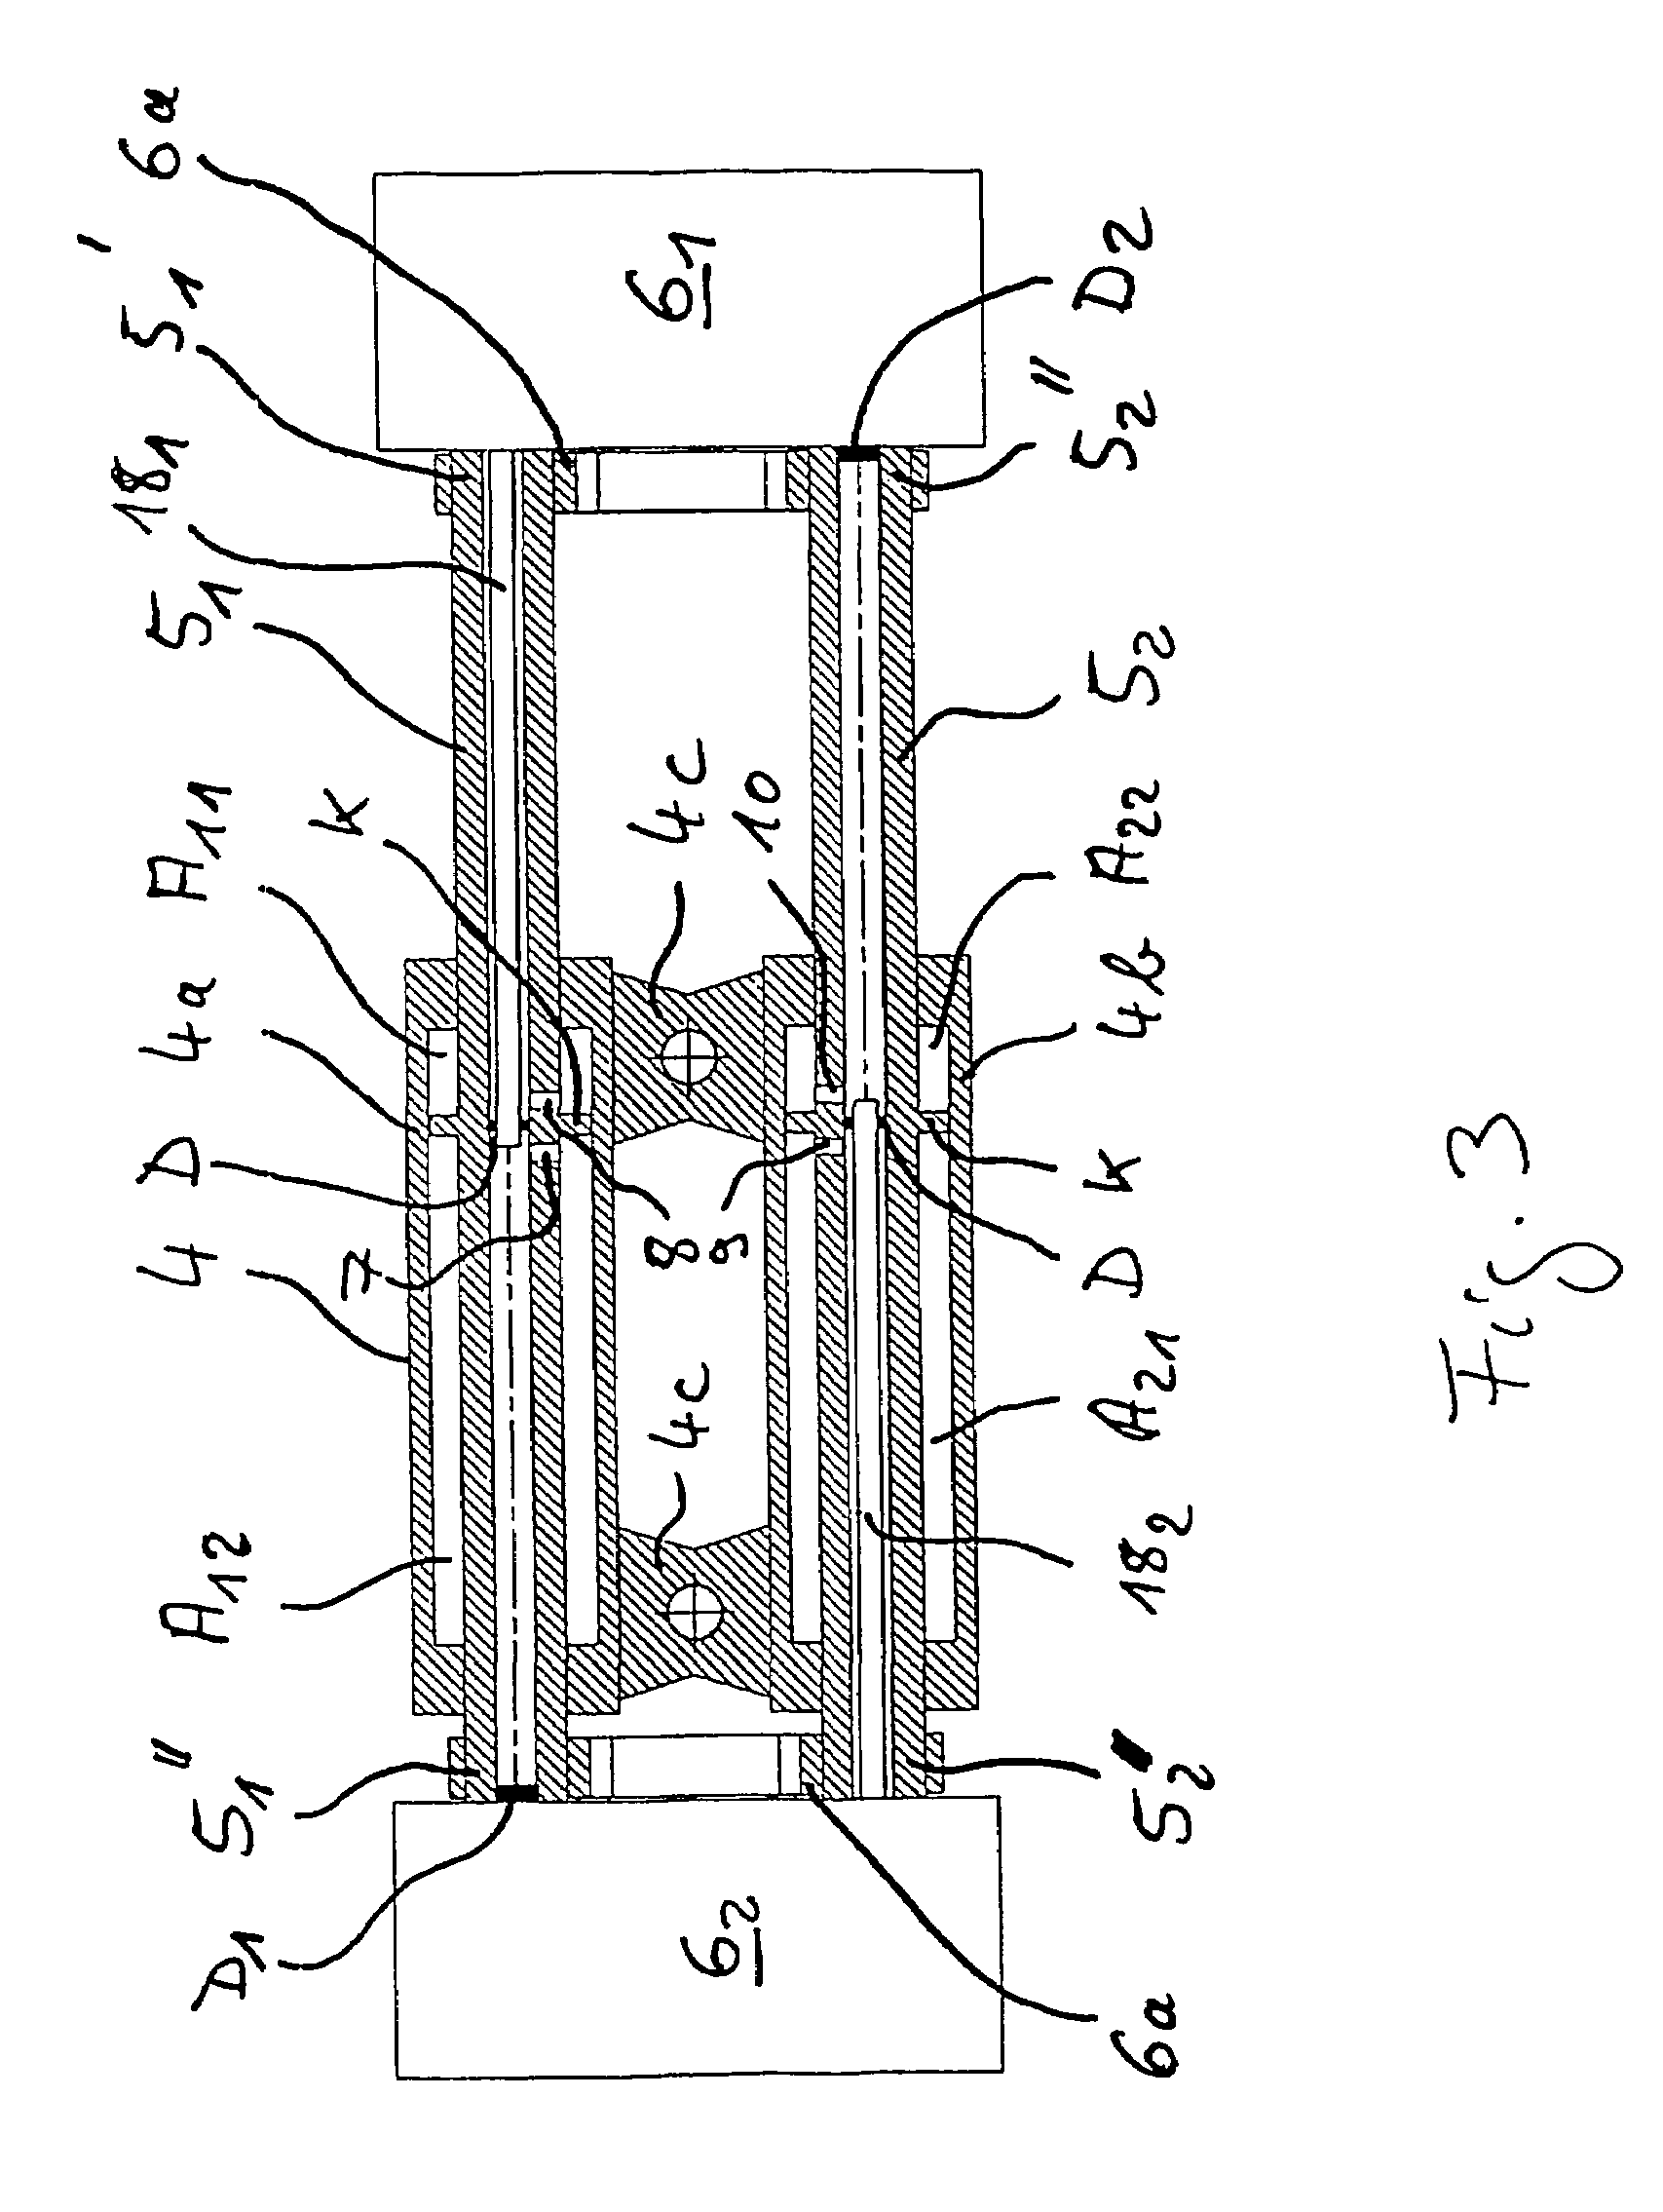 Dual-circuit steer-by-wire steering system comprising a common cradle